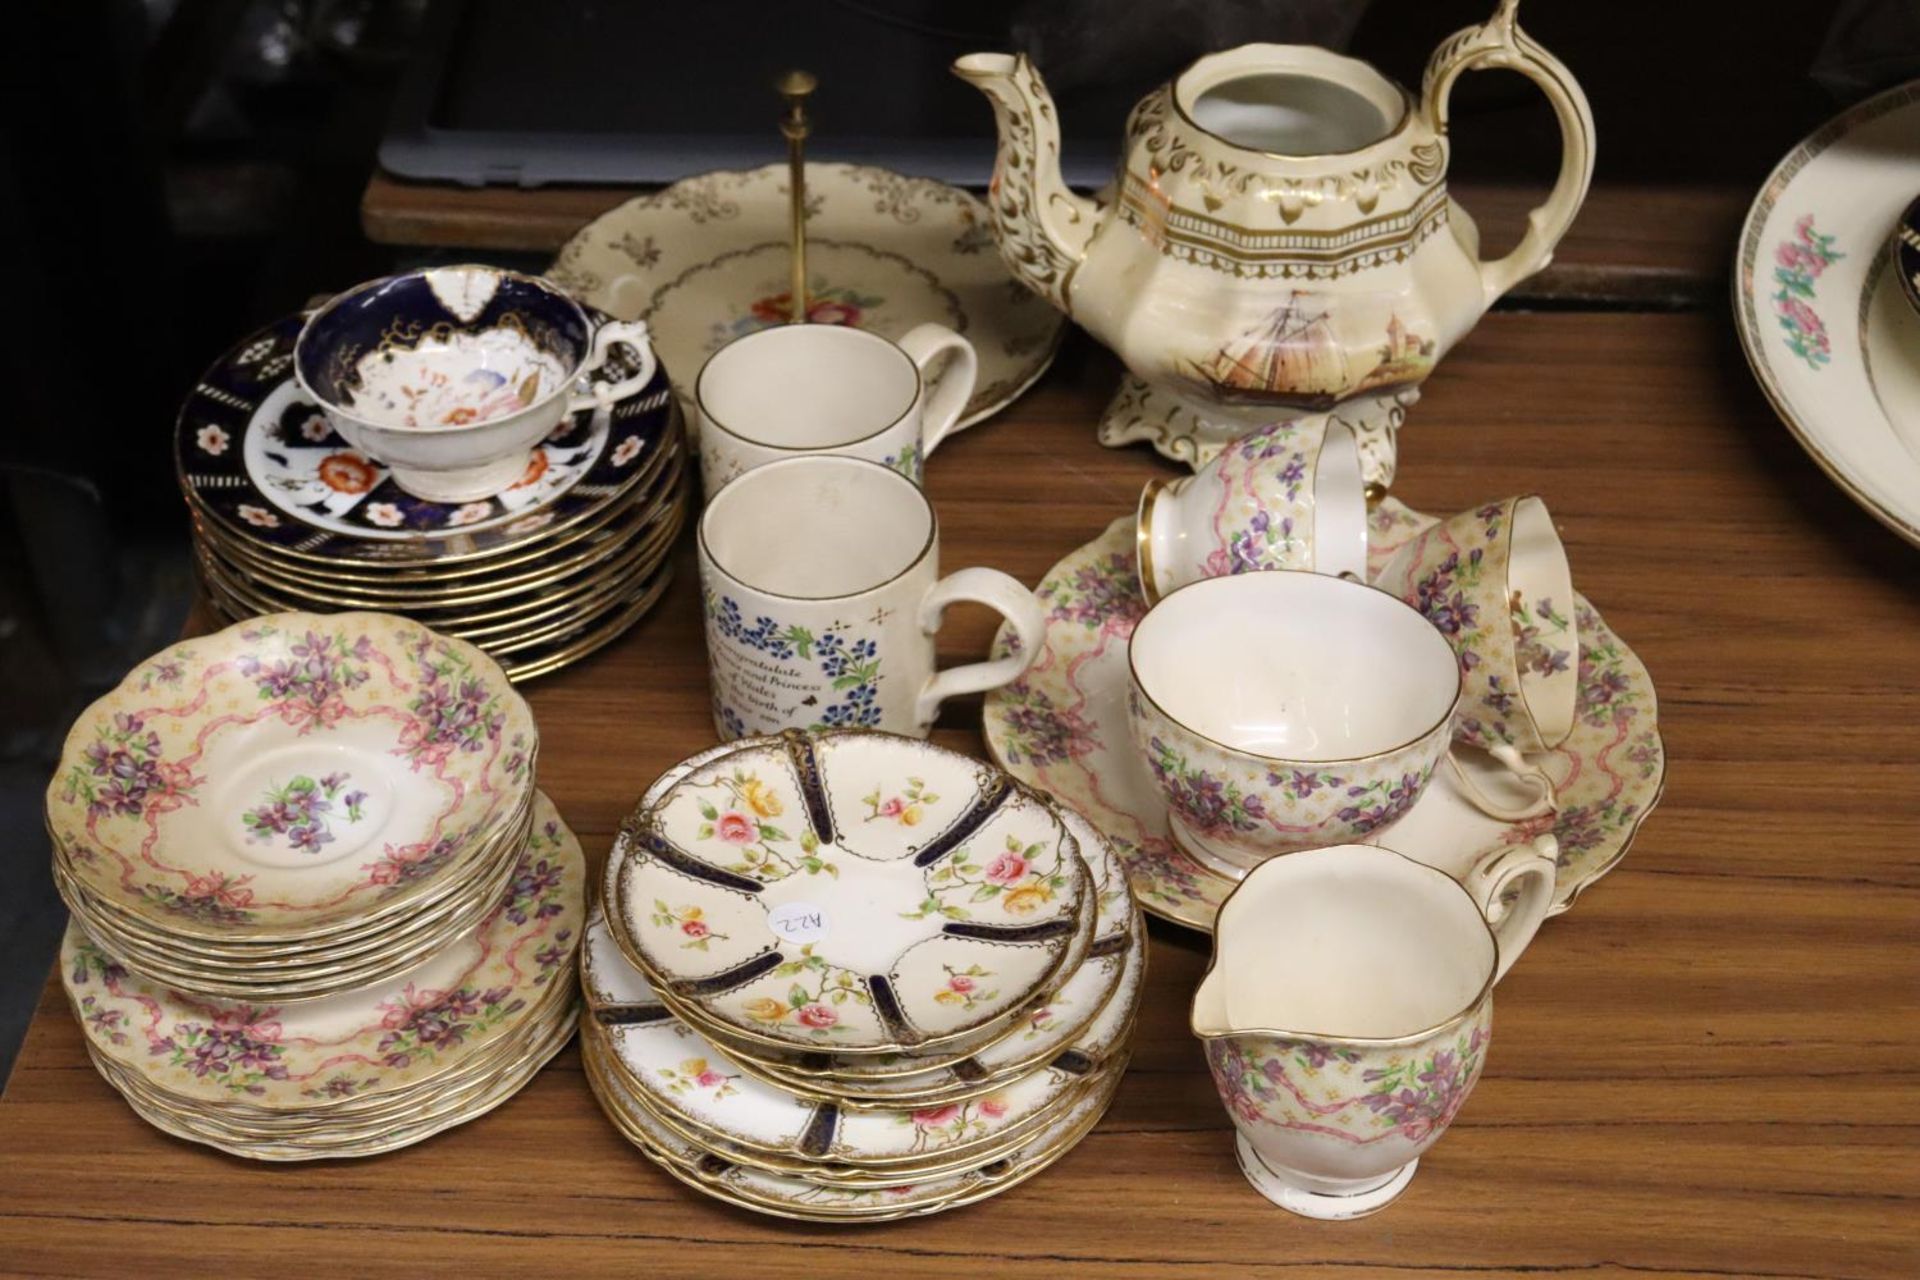 A QUANTITY OF VINTAGE TEAWARE TO INCLUDE QUEEN ANNE, 'SWEET VIOLETS', ETC, CUPS, SAUCERS, SIDE